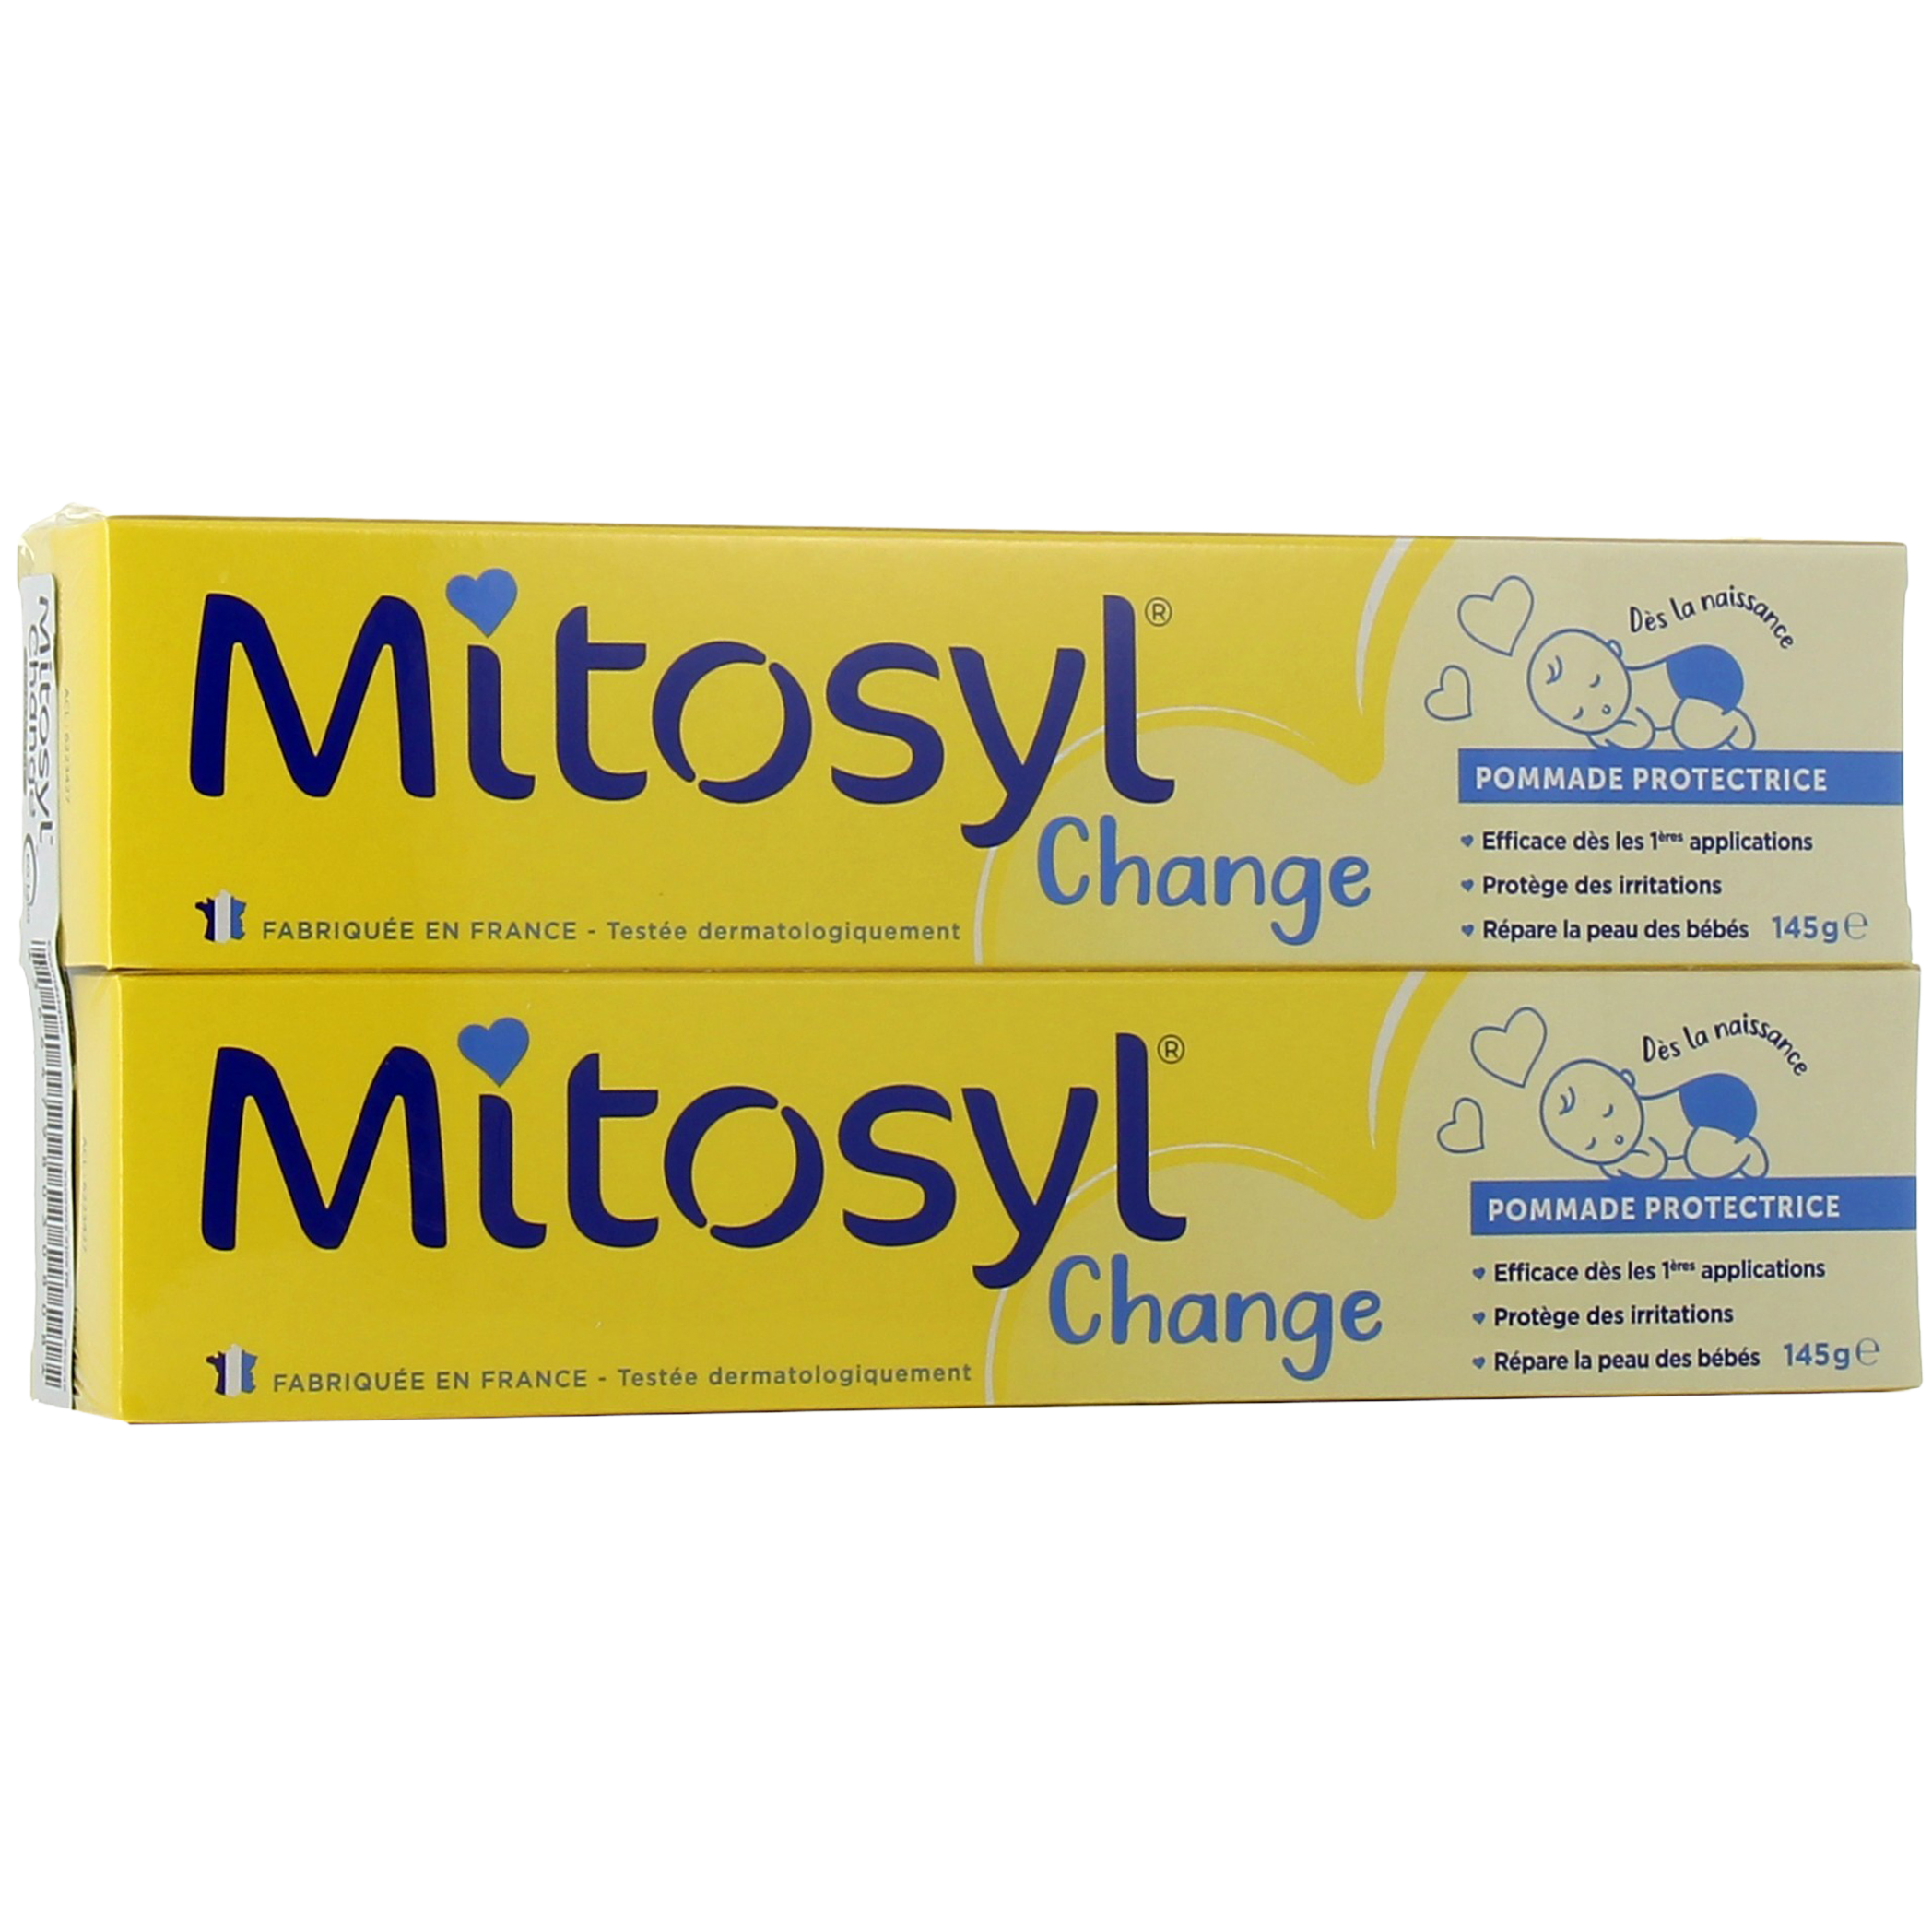 MITOSYL CHANGE POMMADE PROTECTRICE 65G